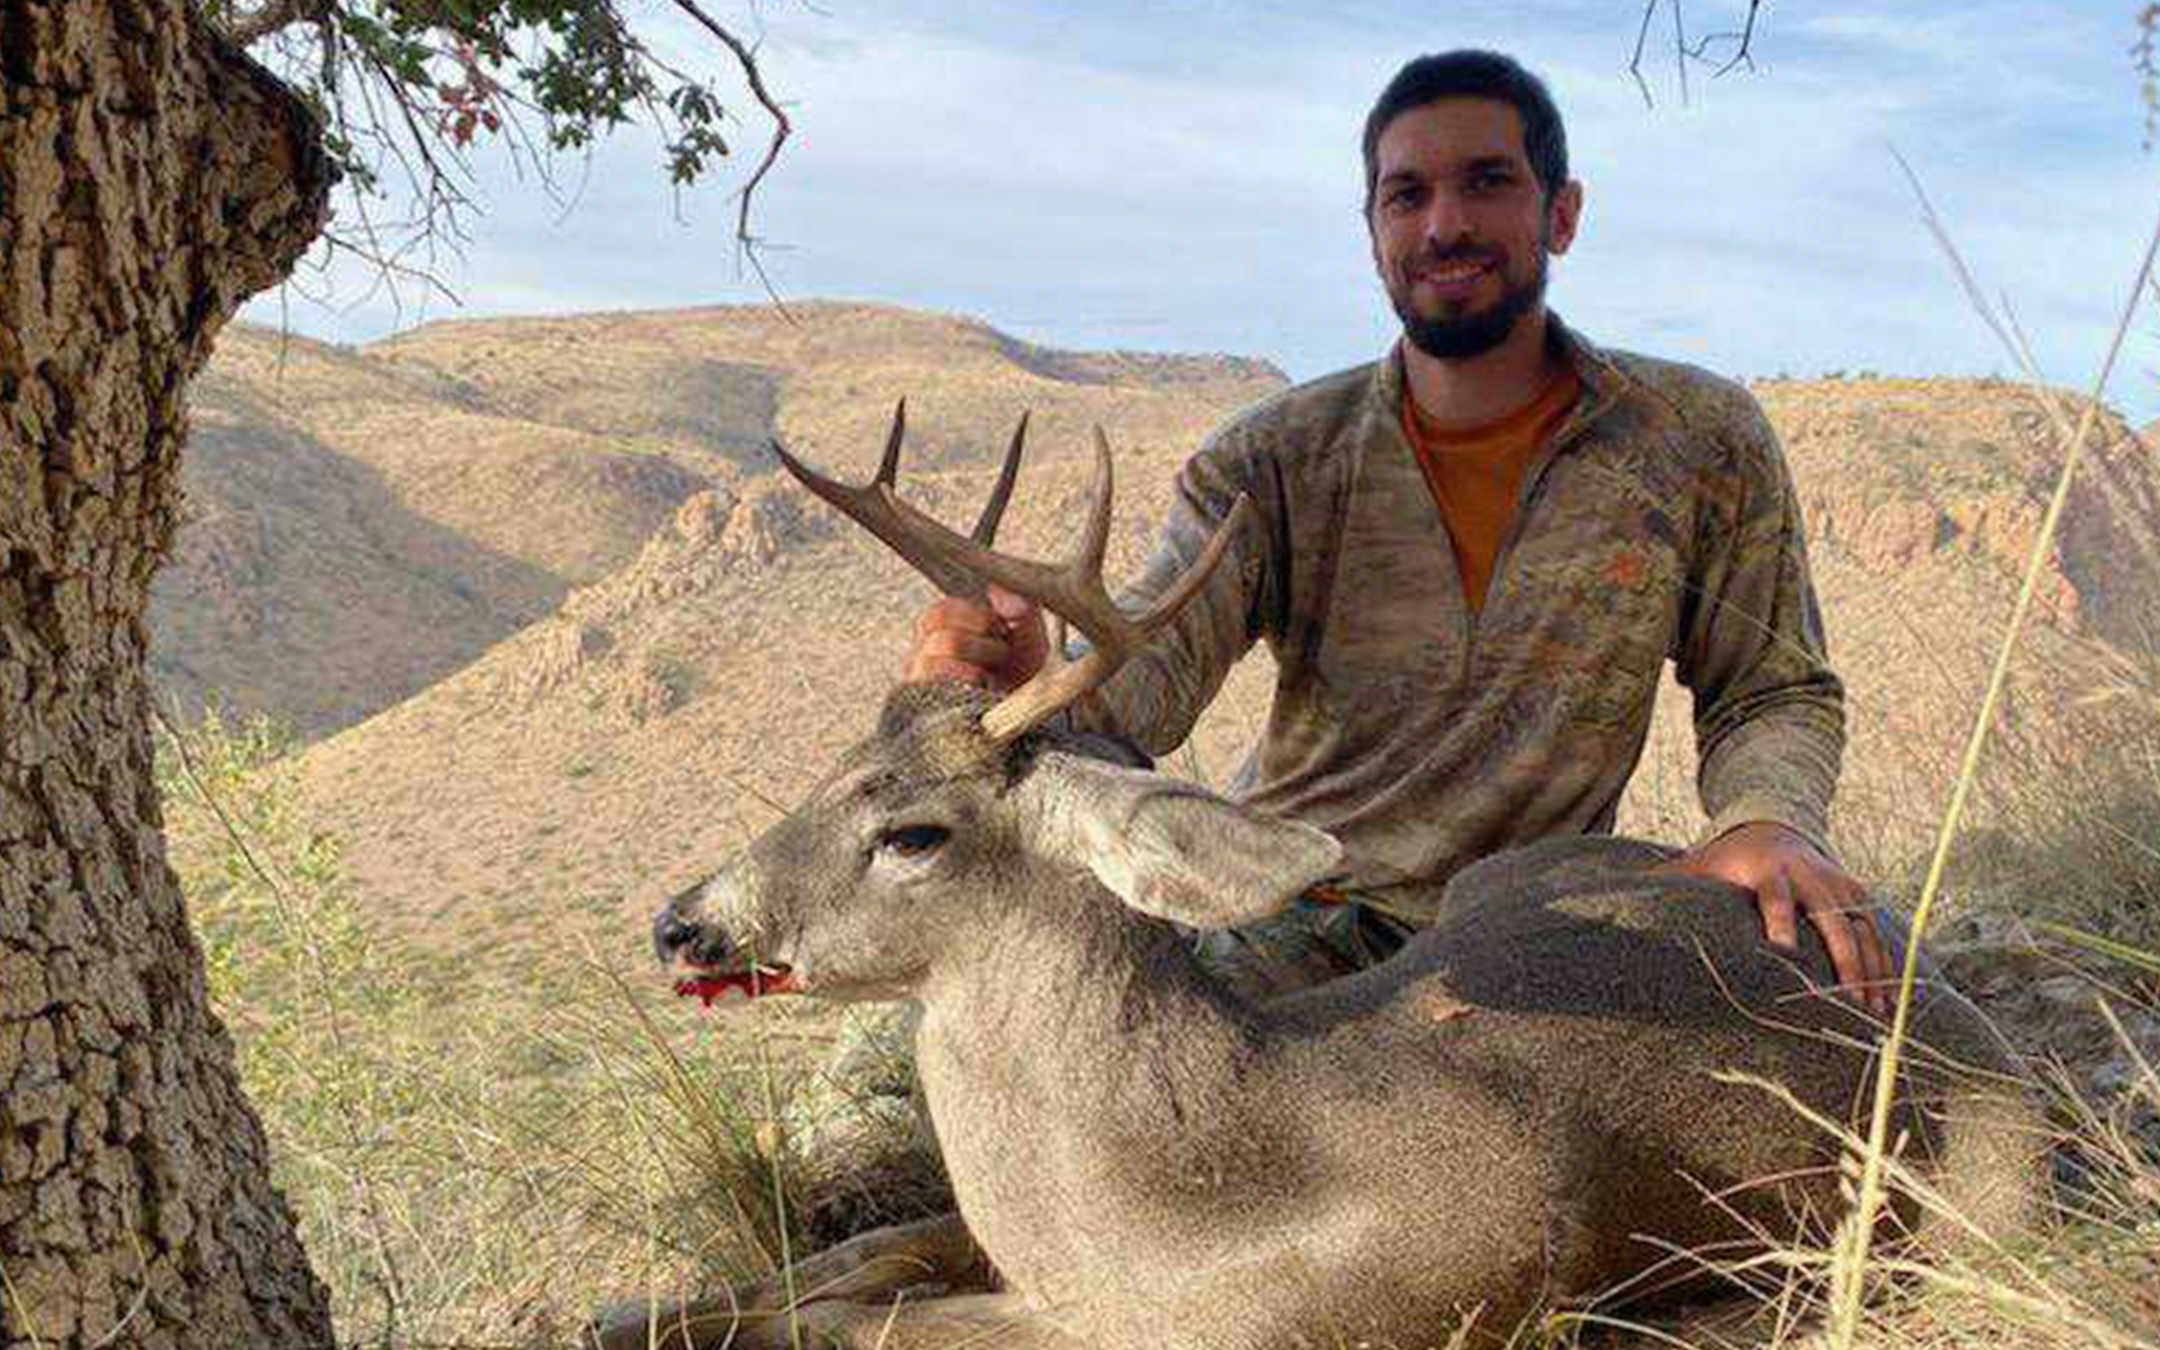 Doug with his coues deer after some long-range shooting